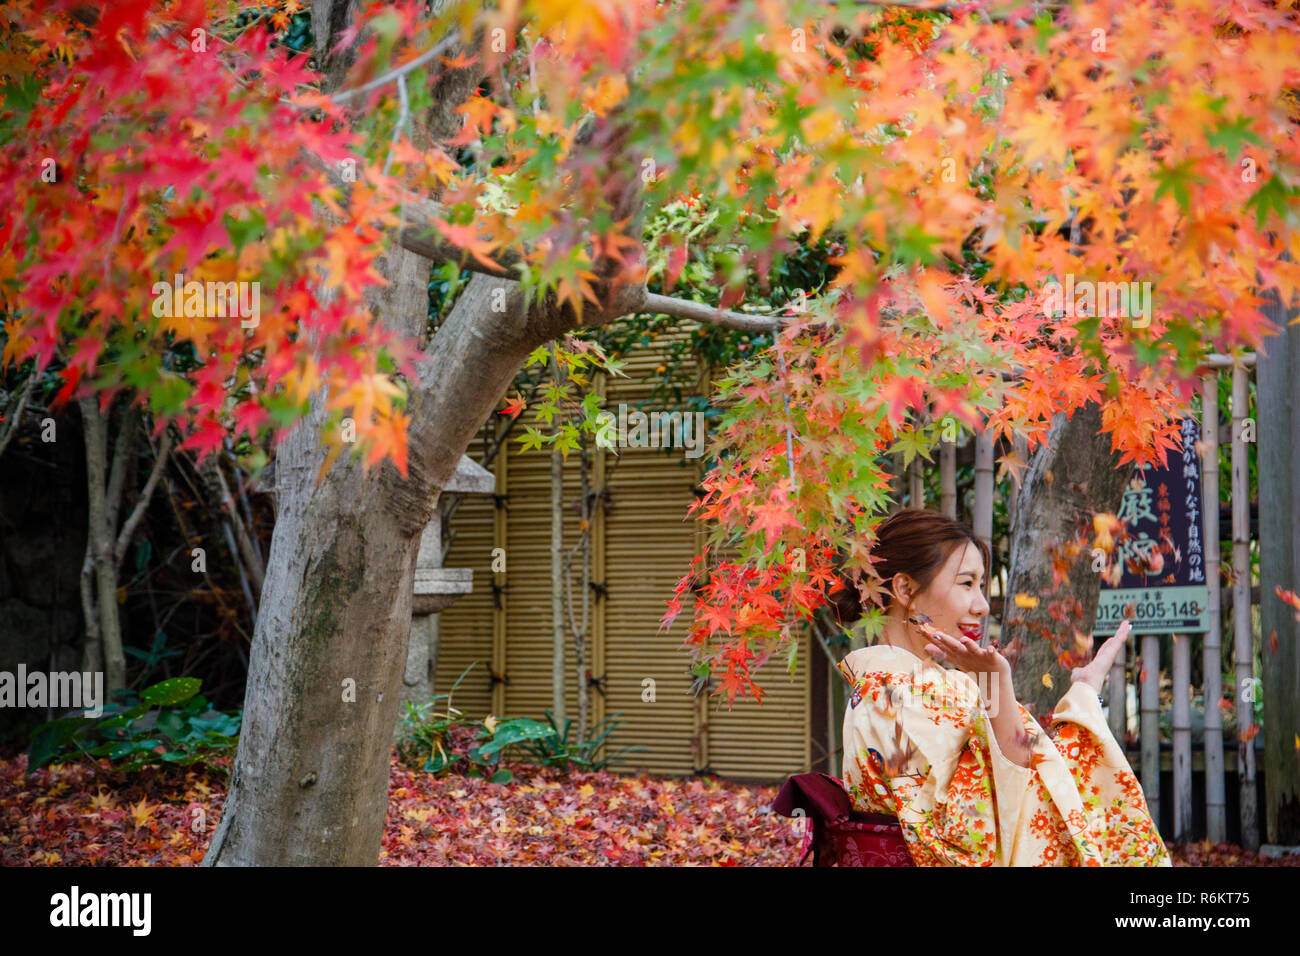 A tourist  wearing a kimono which is one of the traditional style of Japan seen taking pictures next to trees with autumn leaves during fall season in kyoto, japan. Stock Photo